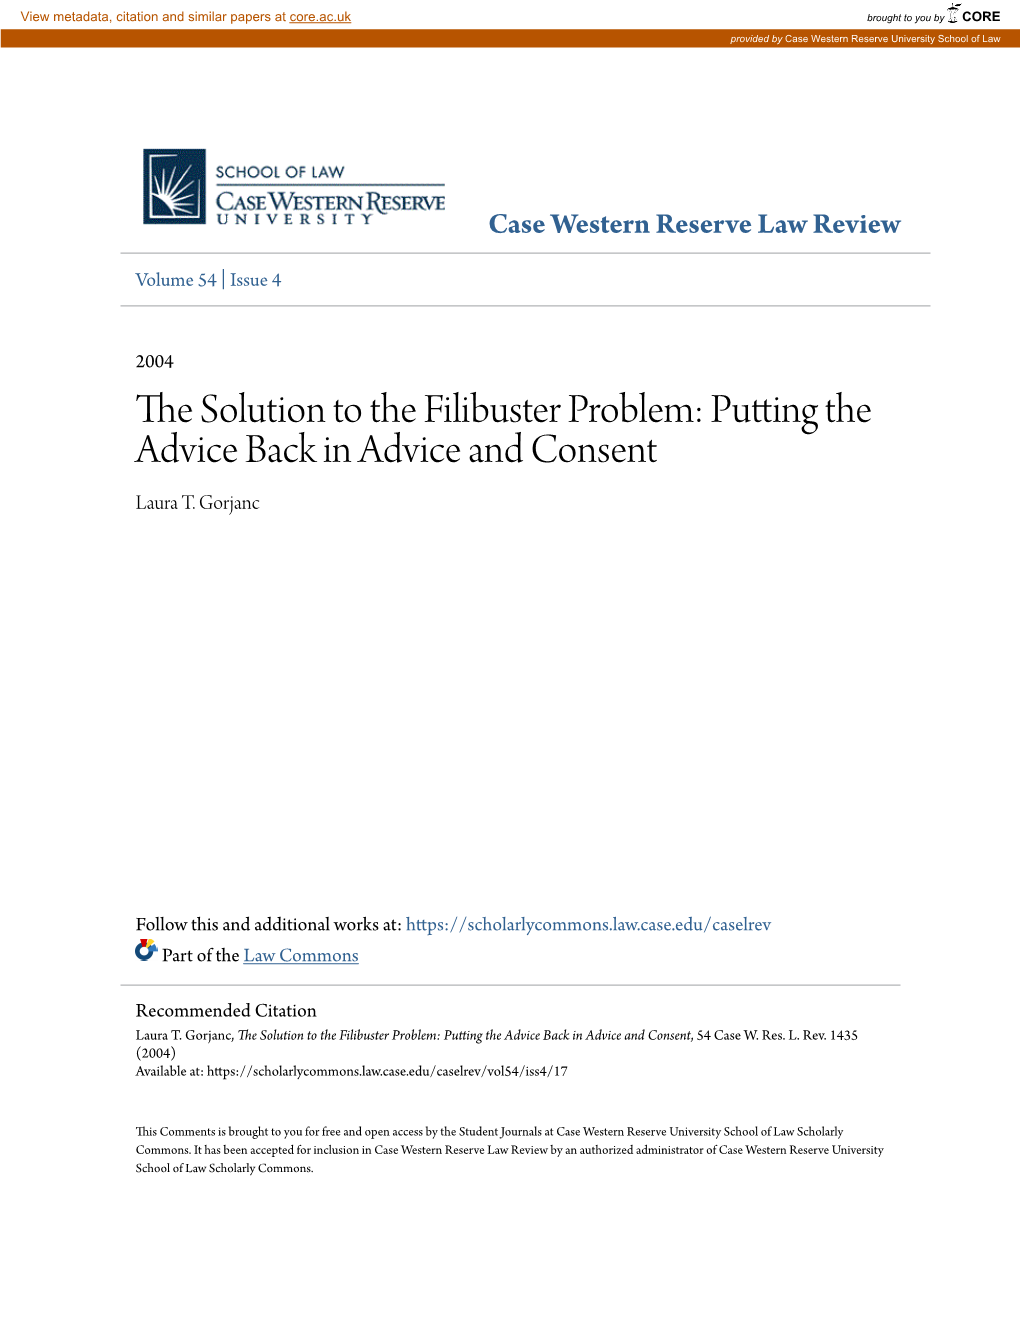 The Solution to the Filibuster Problem: Putting the Advice Back in Advice and Consent, 54 Case W